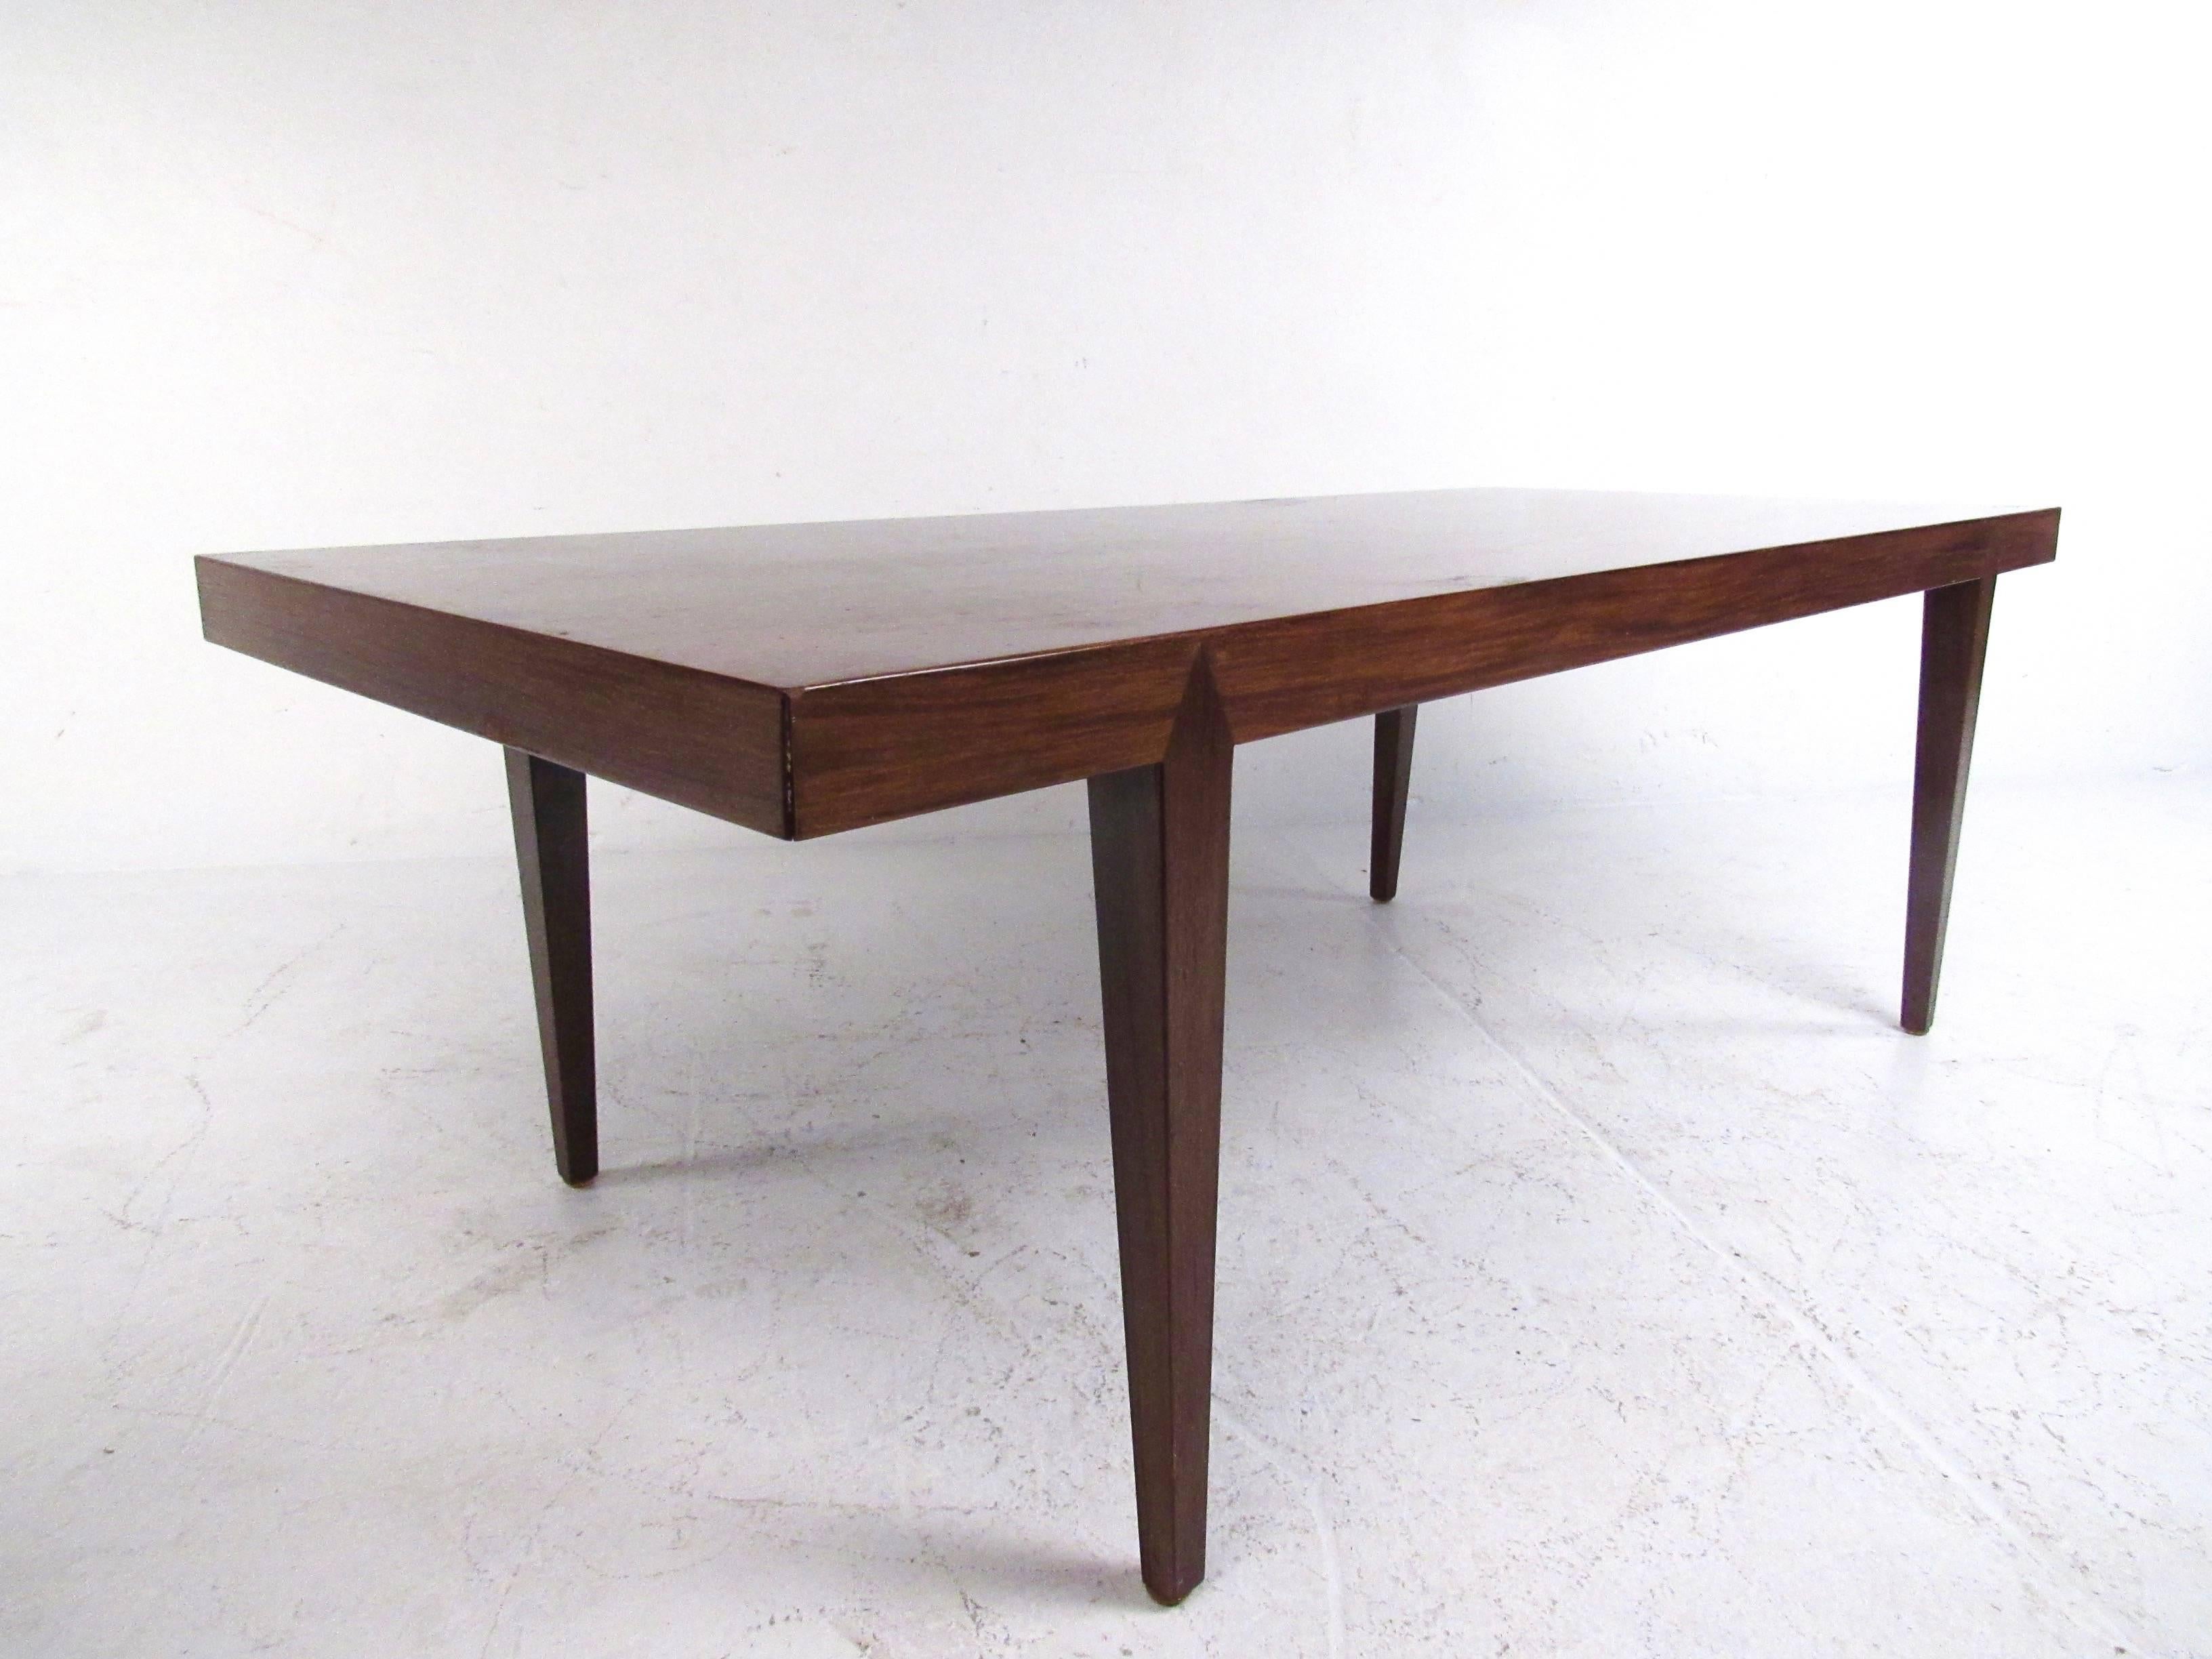 This unique vintage rosewood coffee table features tall slender tapered legs with unique jointed construction. Beautiful vintage finish adds to the Mid-Century charm of this cocktail table that makes a perfect center piece to any setting at home or